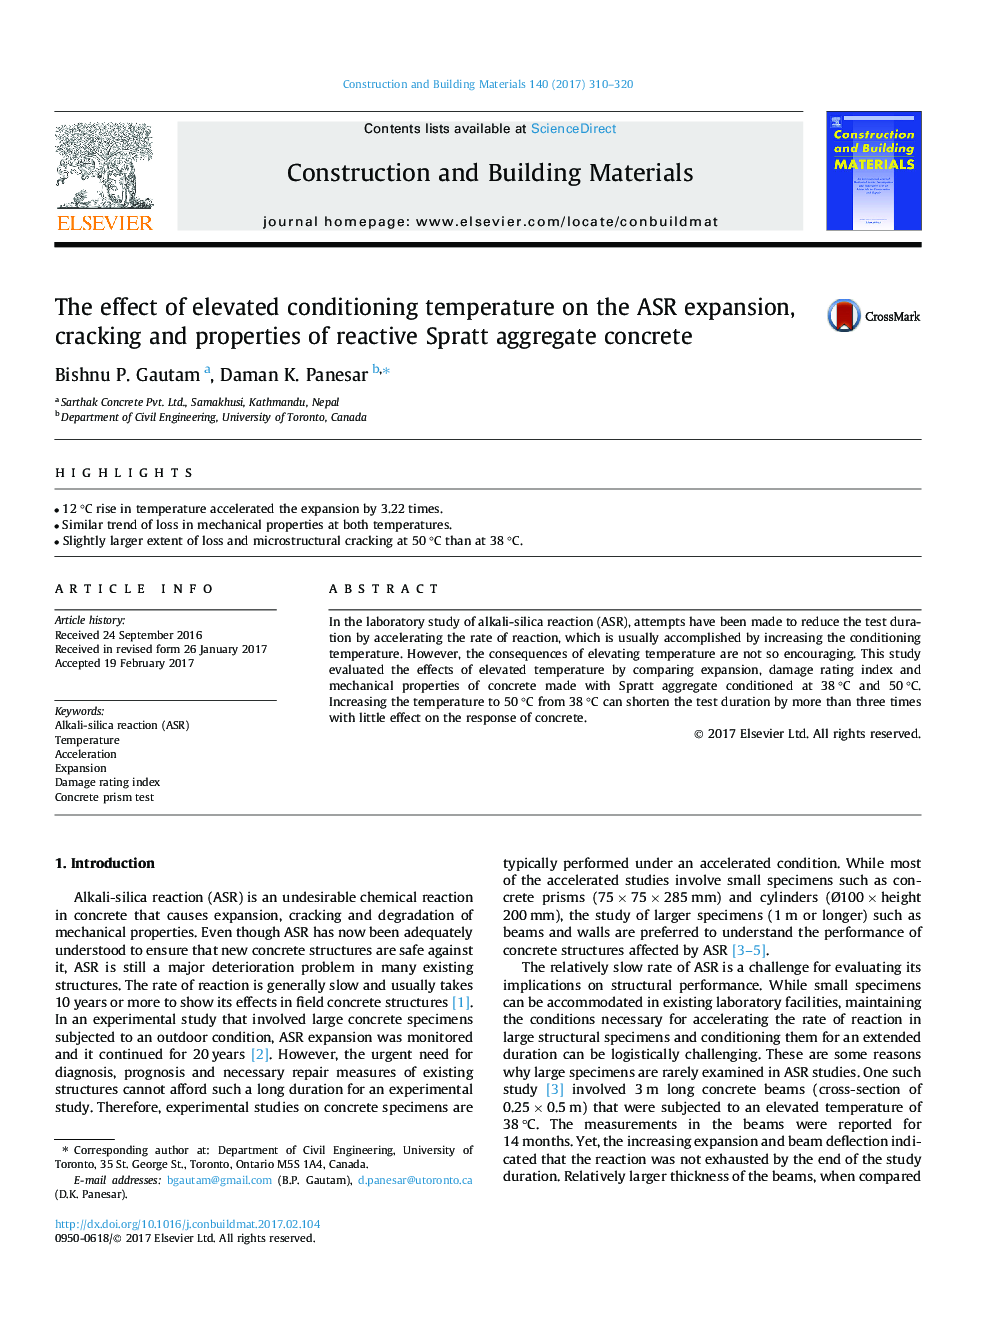 The effect of elevated conditioning temperature on the ASR expansion, cracking and properties of reactive Spratt aggregate concrete